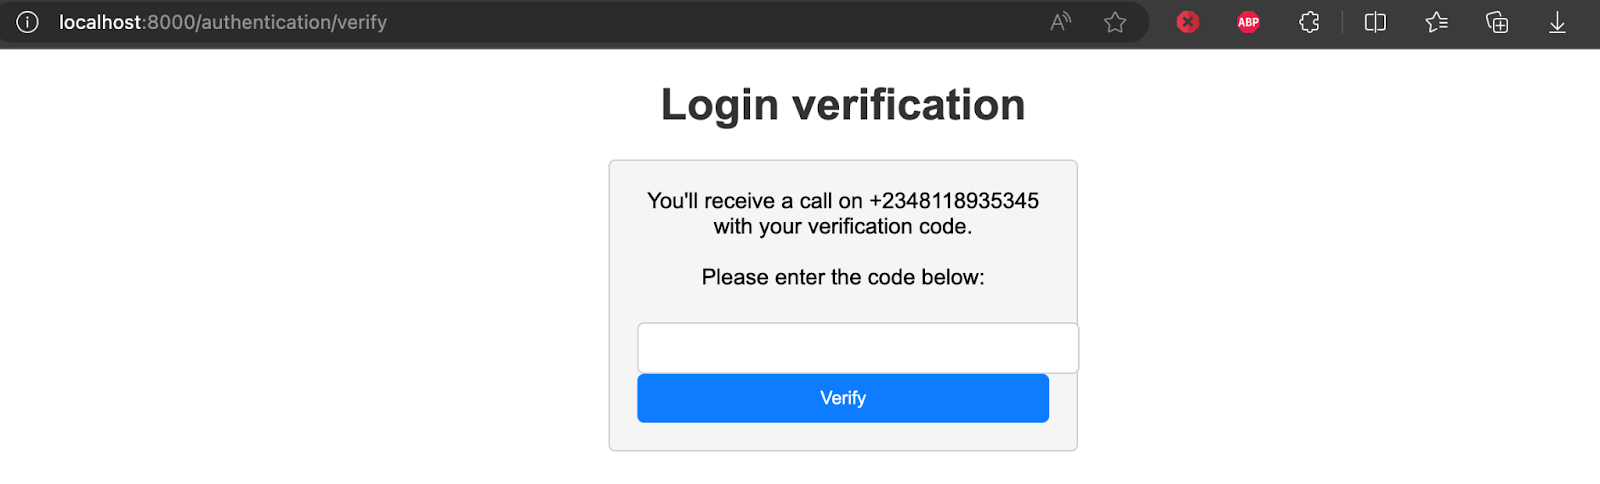 The Login Verification page of the application.